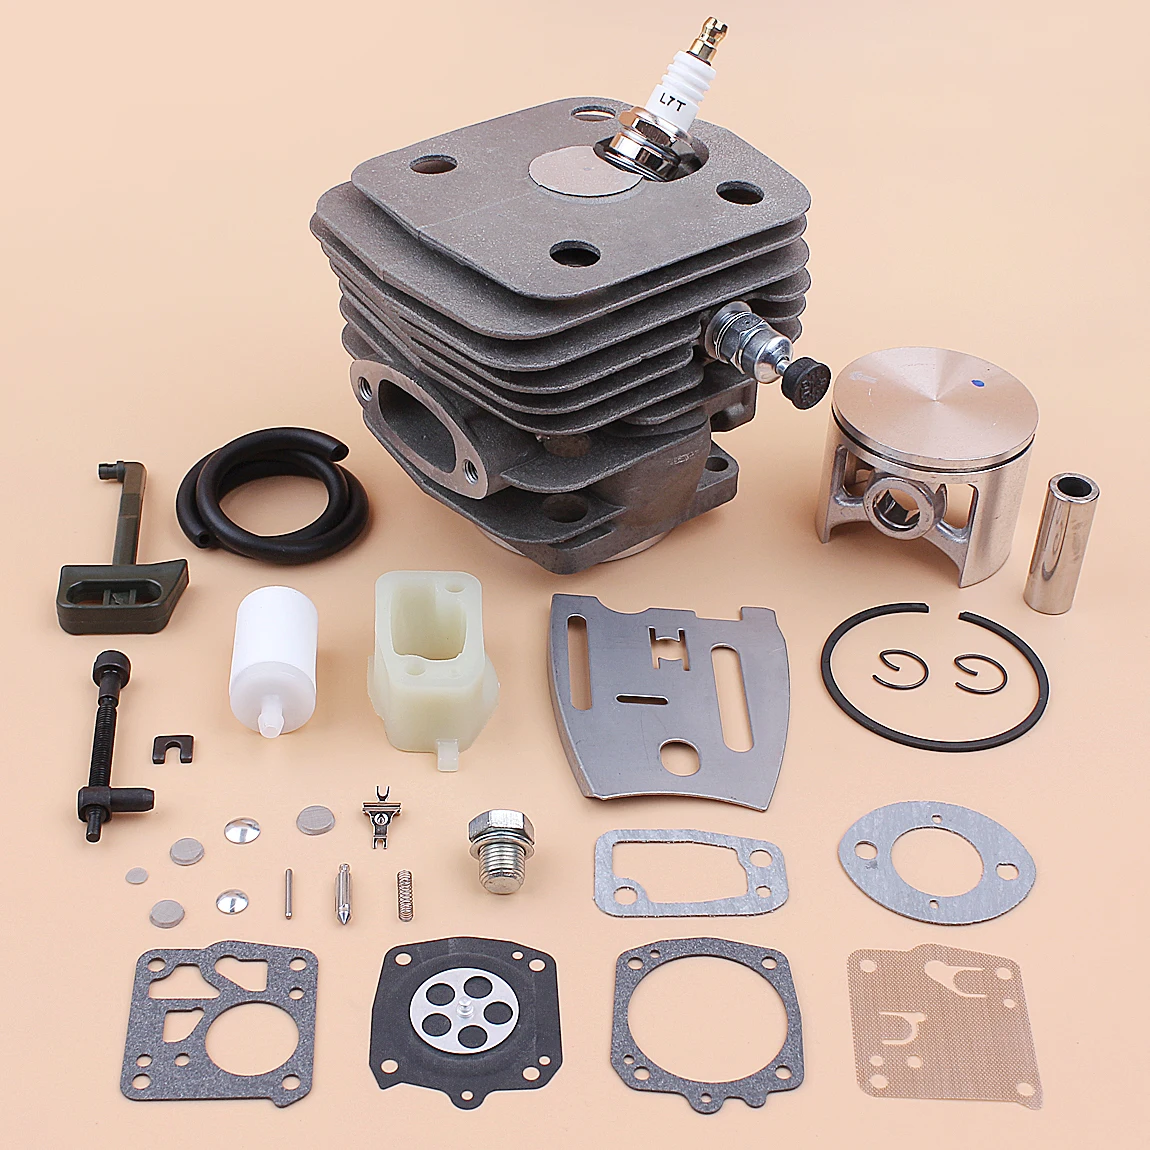 54mm Cylinder Piston Carb Kit For Husqvarna 288XP 181 281 288 Chainsaws Power Tools 503506301 motosierras бензопила